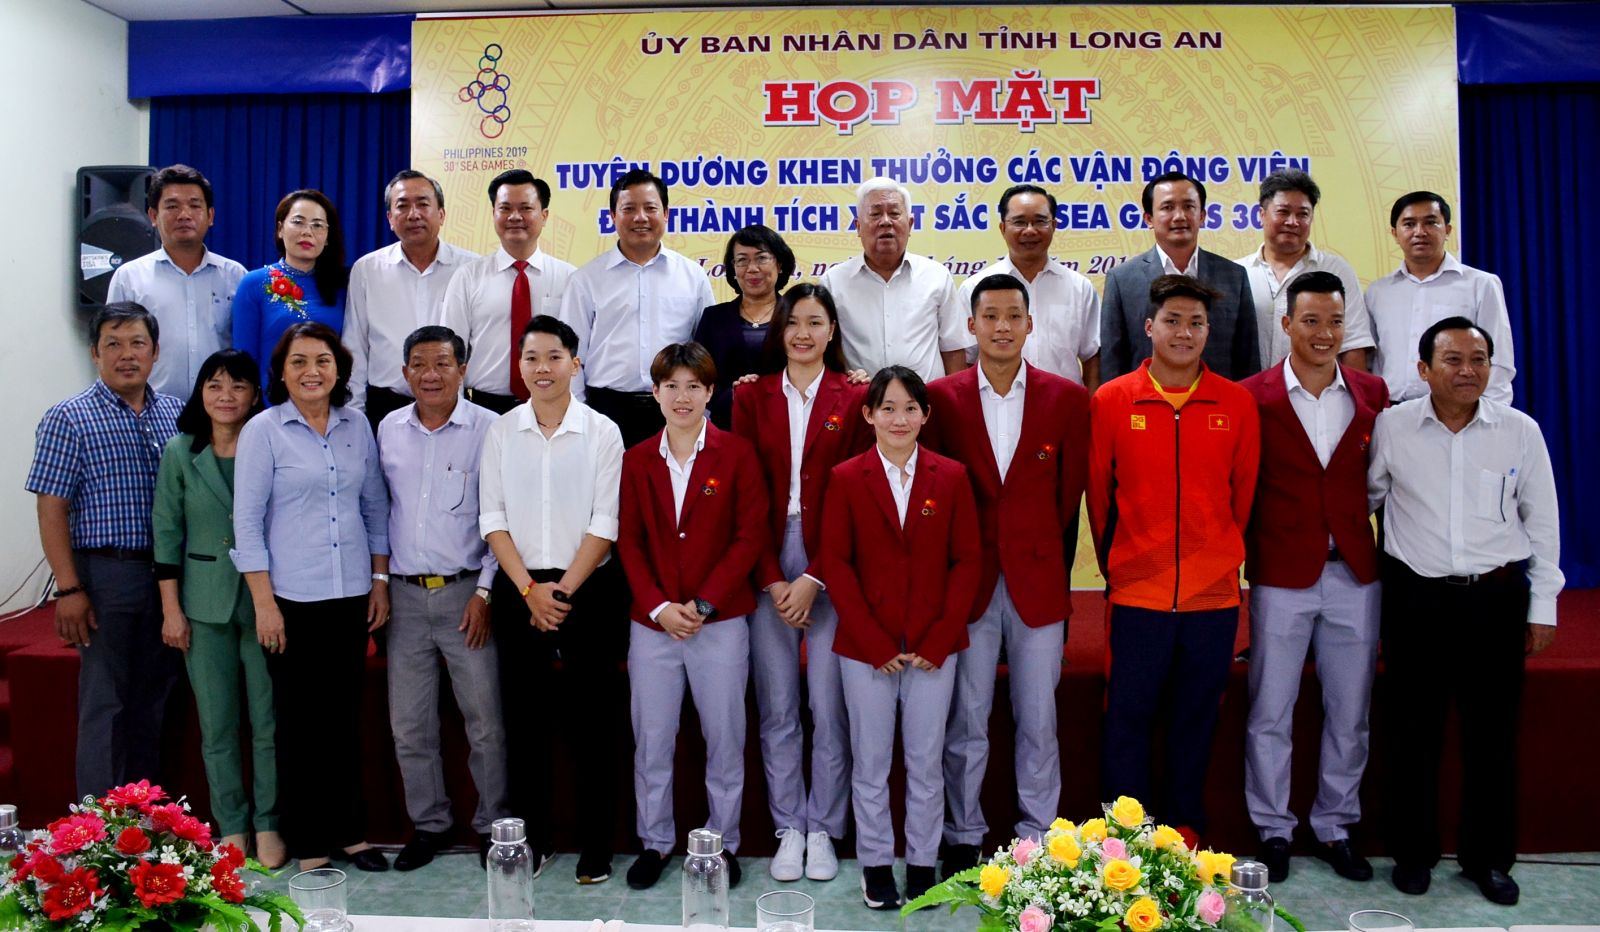 Long An Provincial People's Committee held a meeting to commend and reward the athletes of Long An province for their outstanding achievements at SEA Games 30